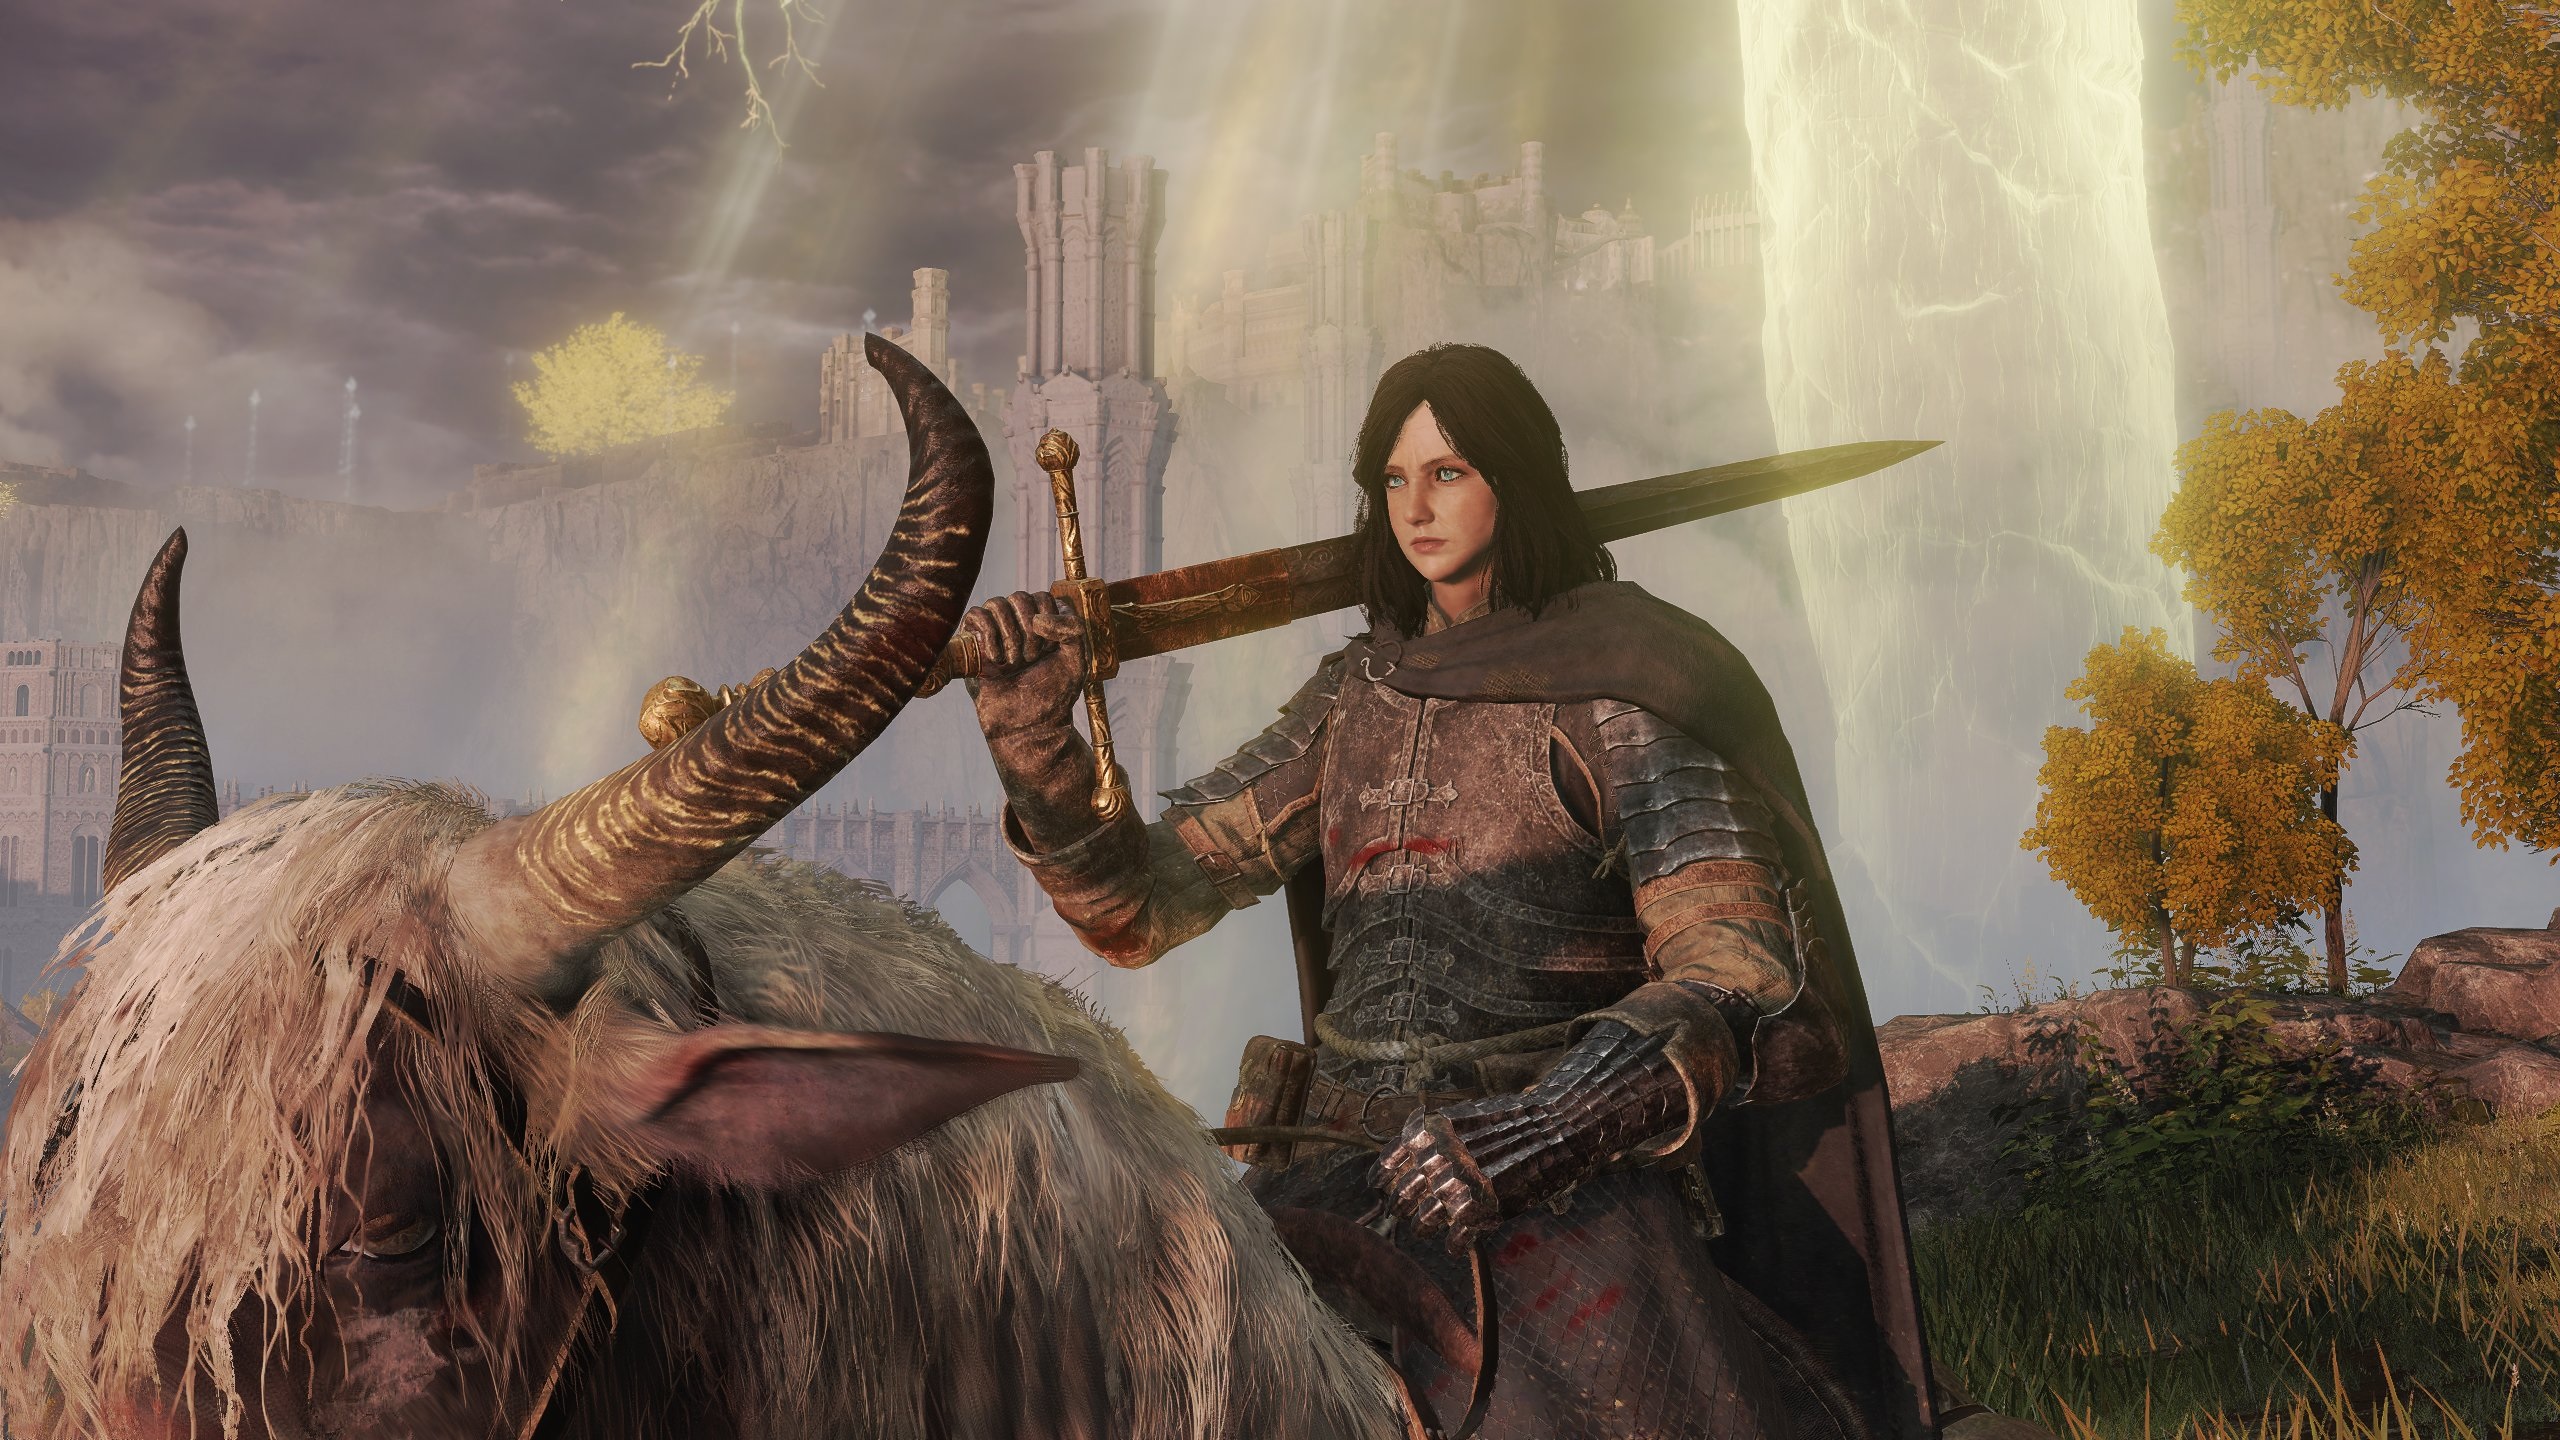 Elden Ring on PC has frame-rate problems, Namco says - Polygon